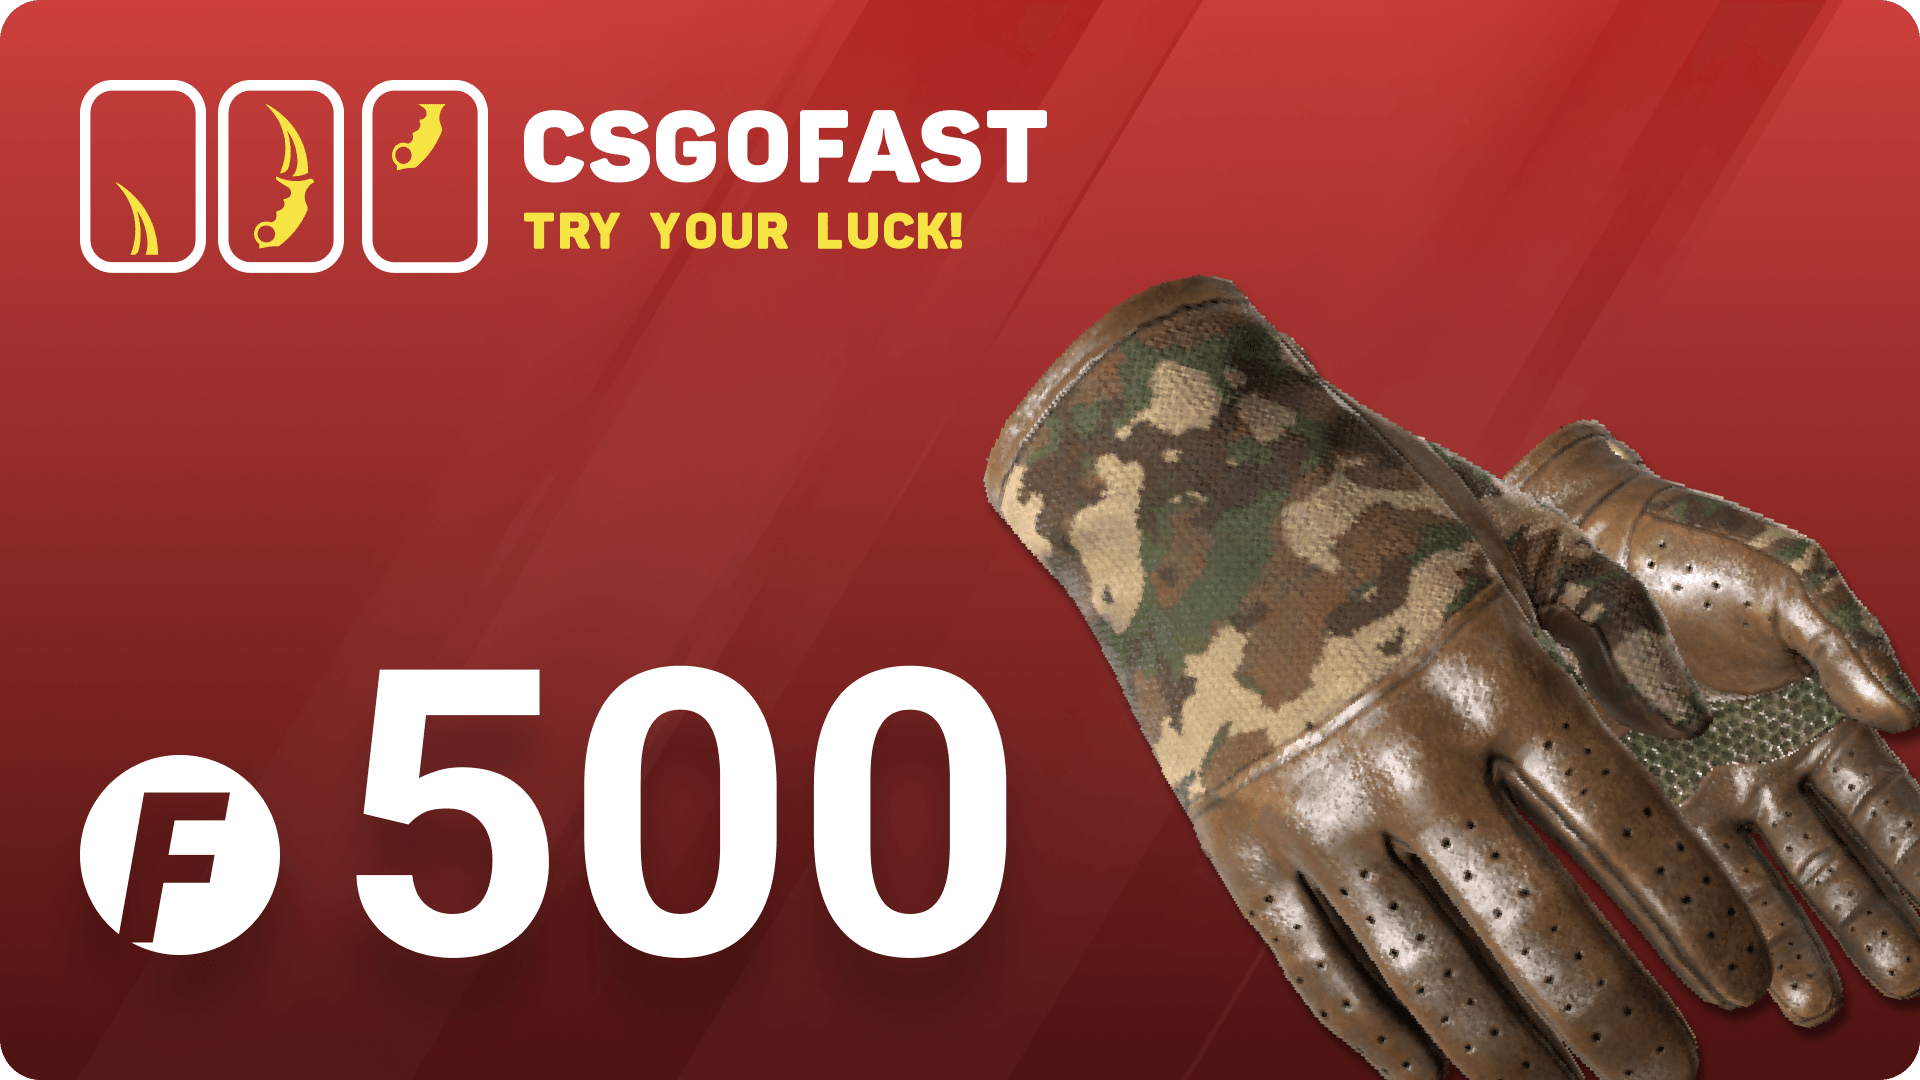 [$ 353.1] CSGOFAST 500 Fast Coins Gift Card